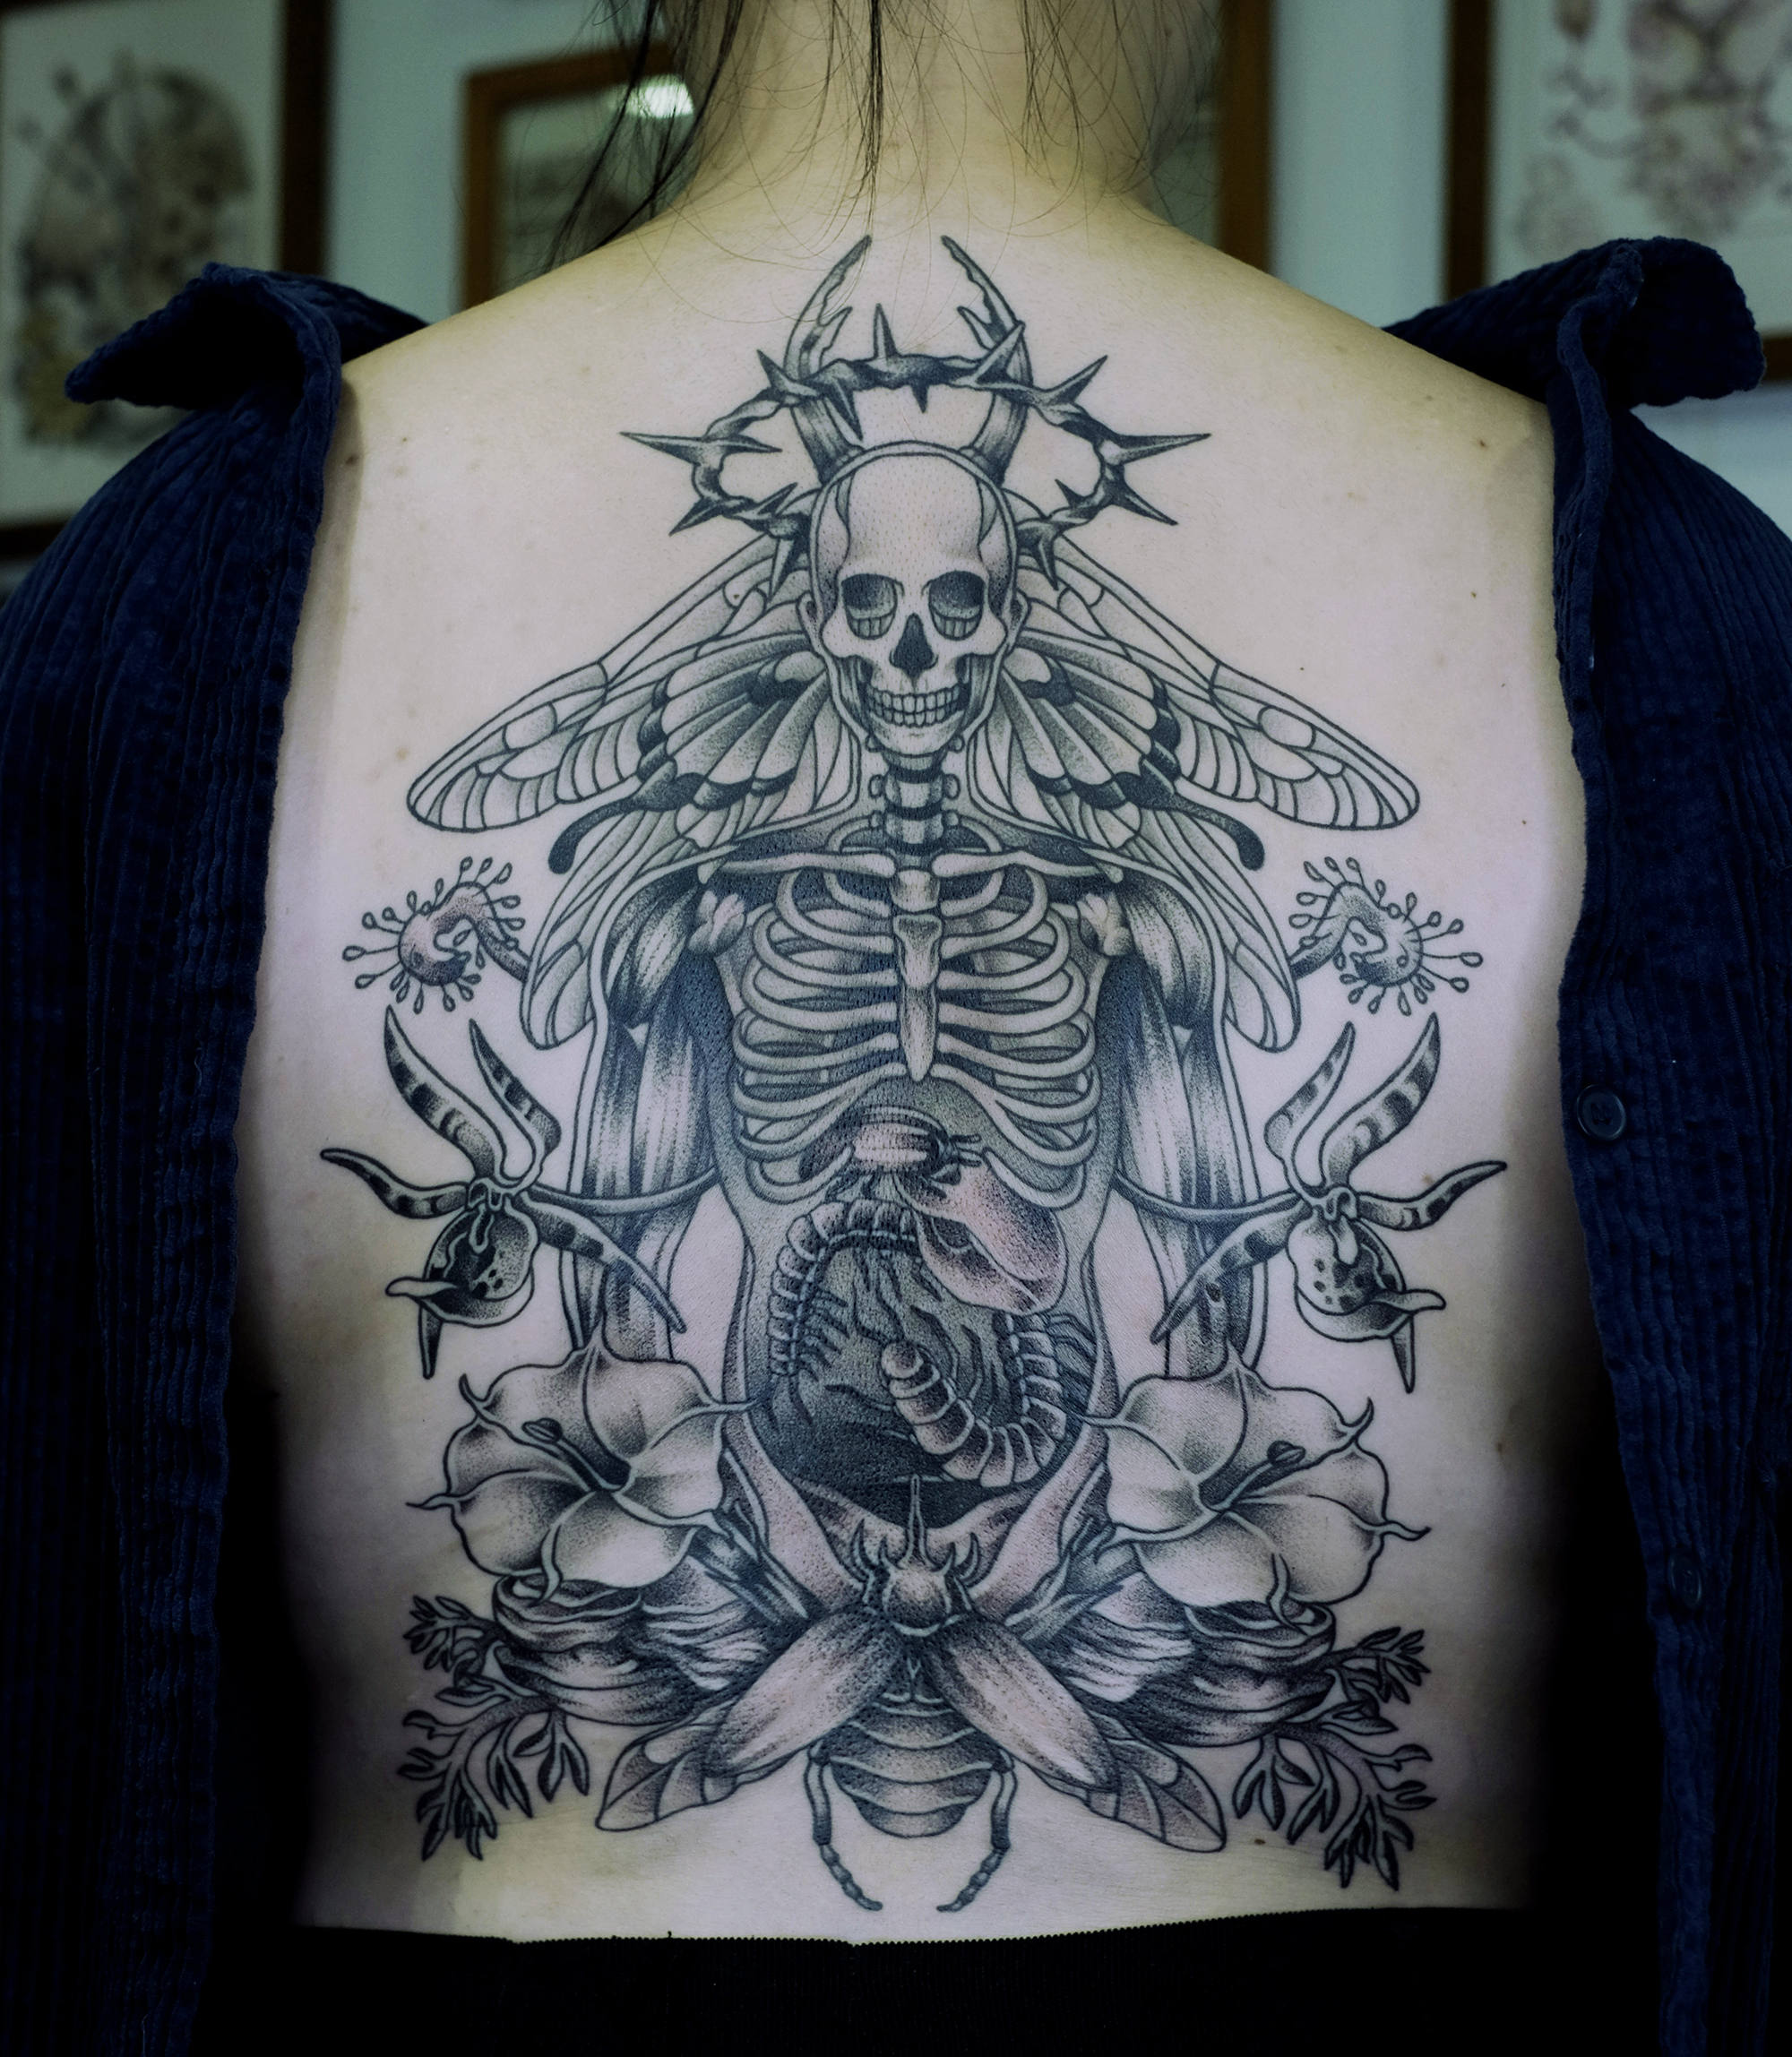 Dark art tattoo with skeleton on back by yelselogy from singapore